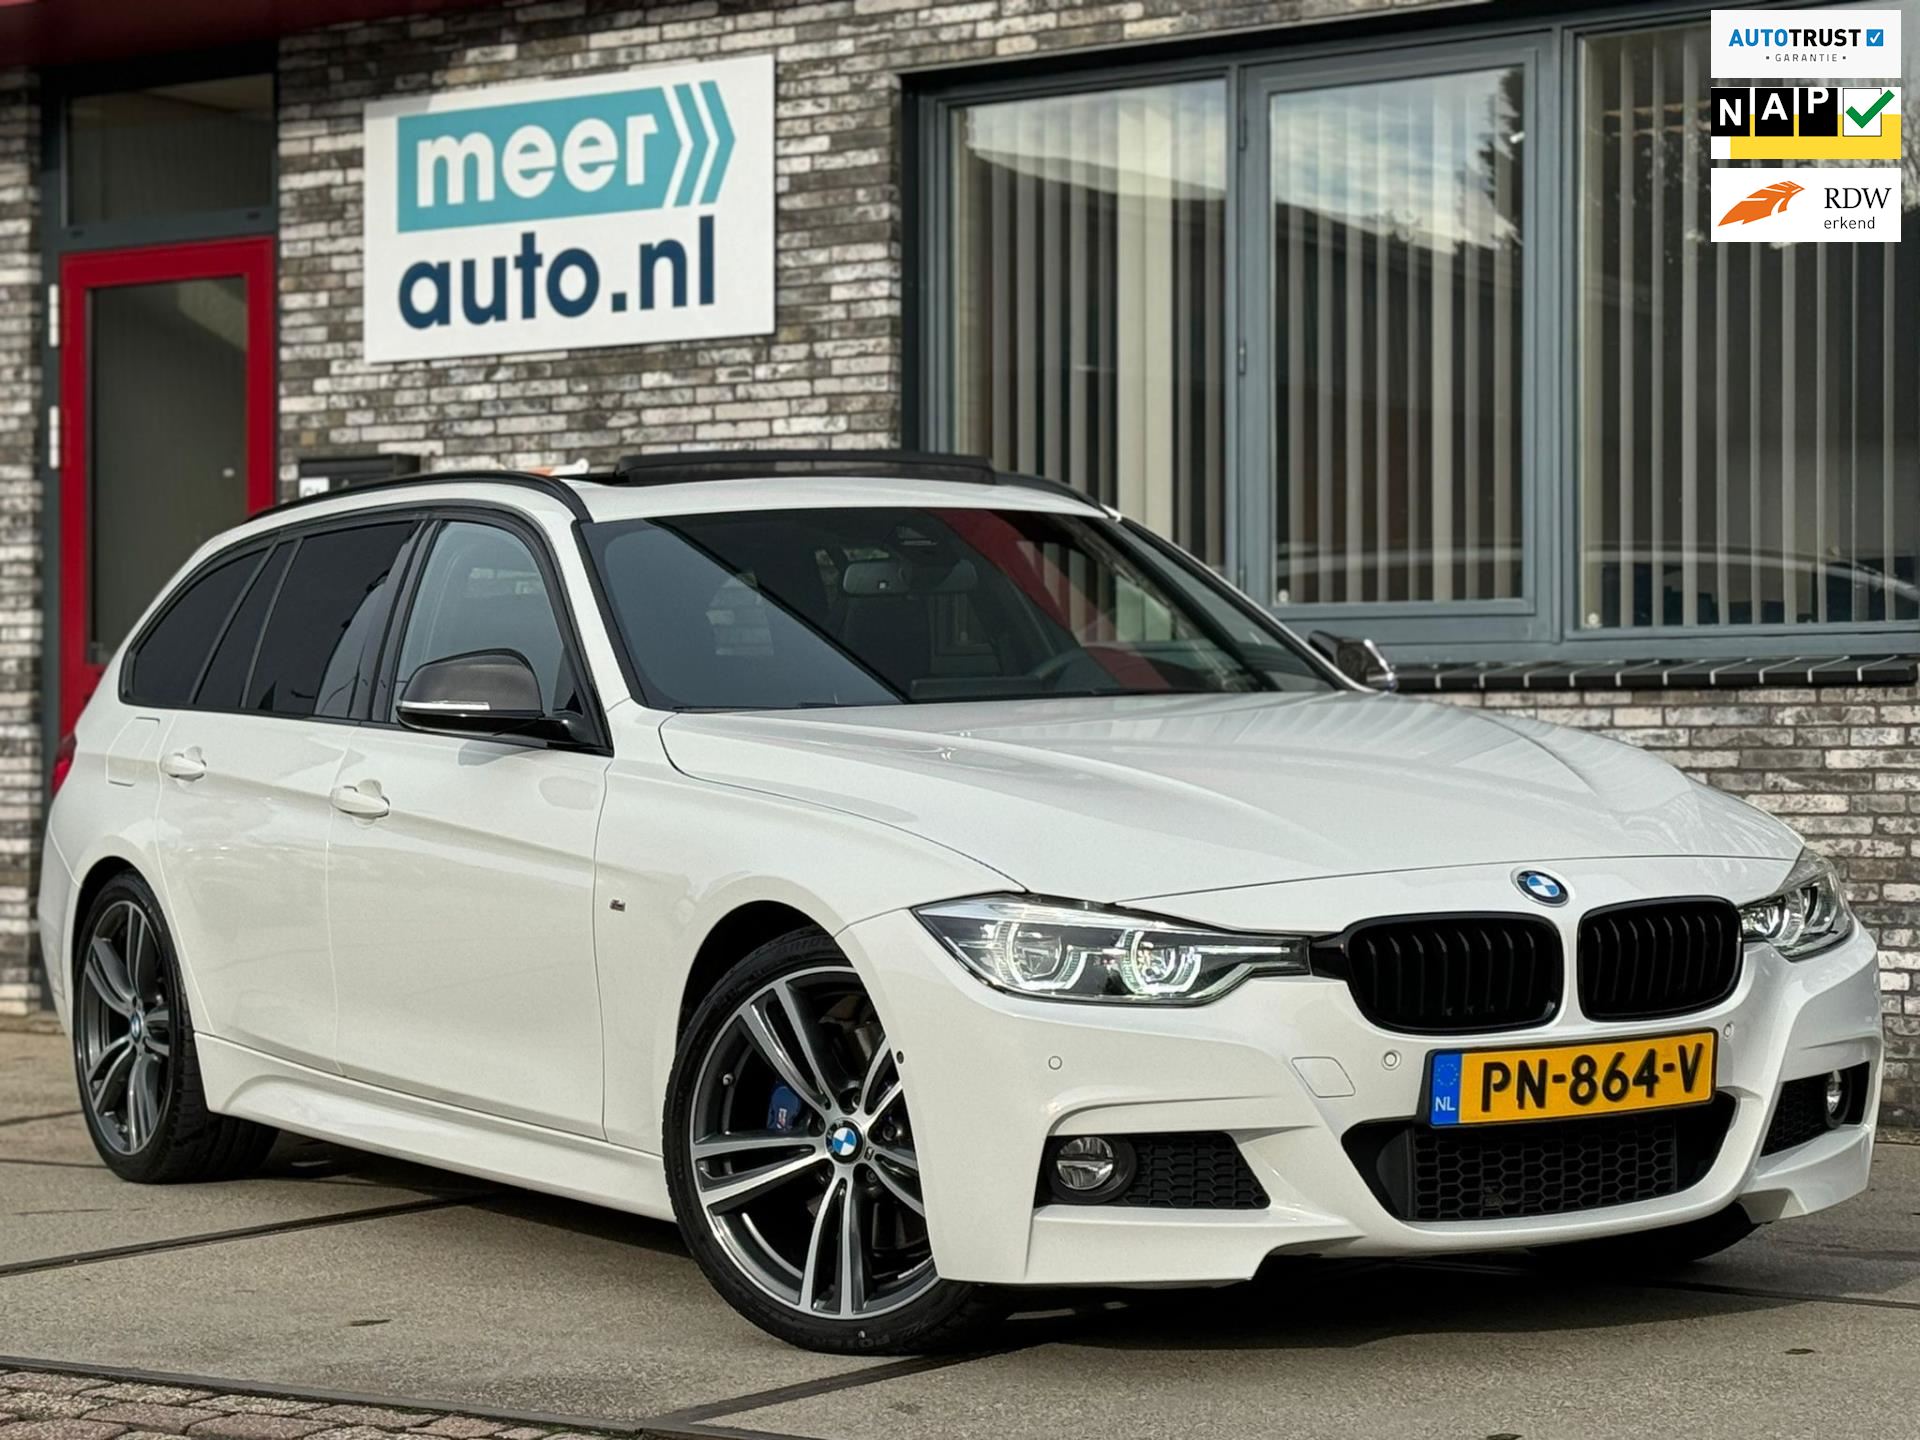 BMW 3-serie Touring occasion - Meerauto.nl